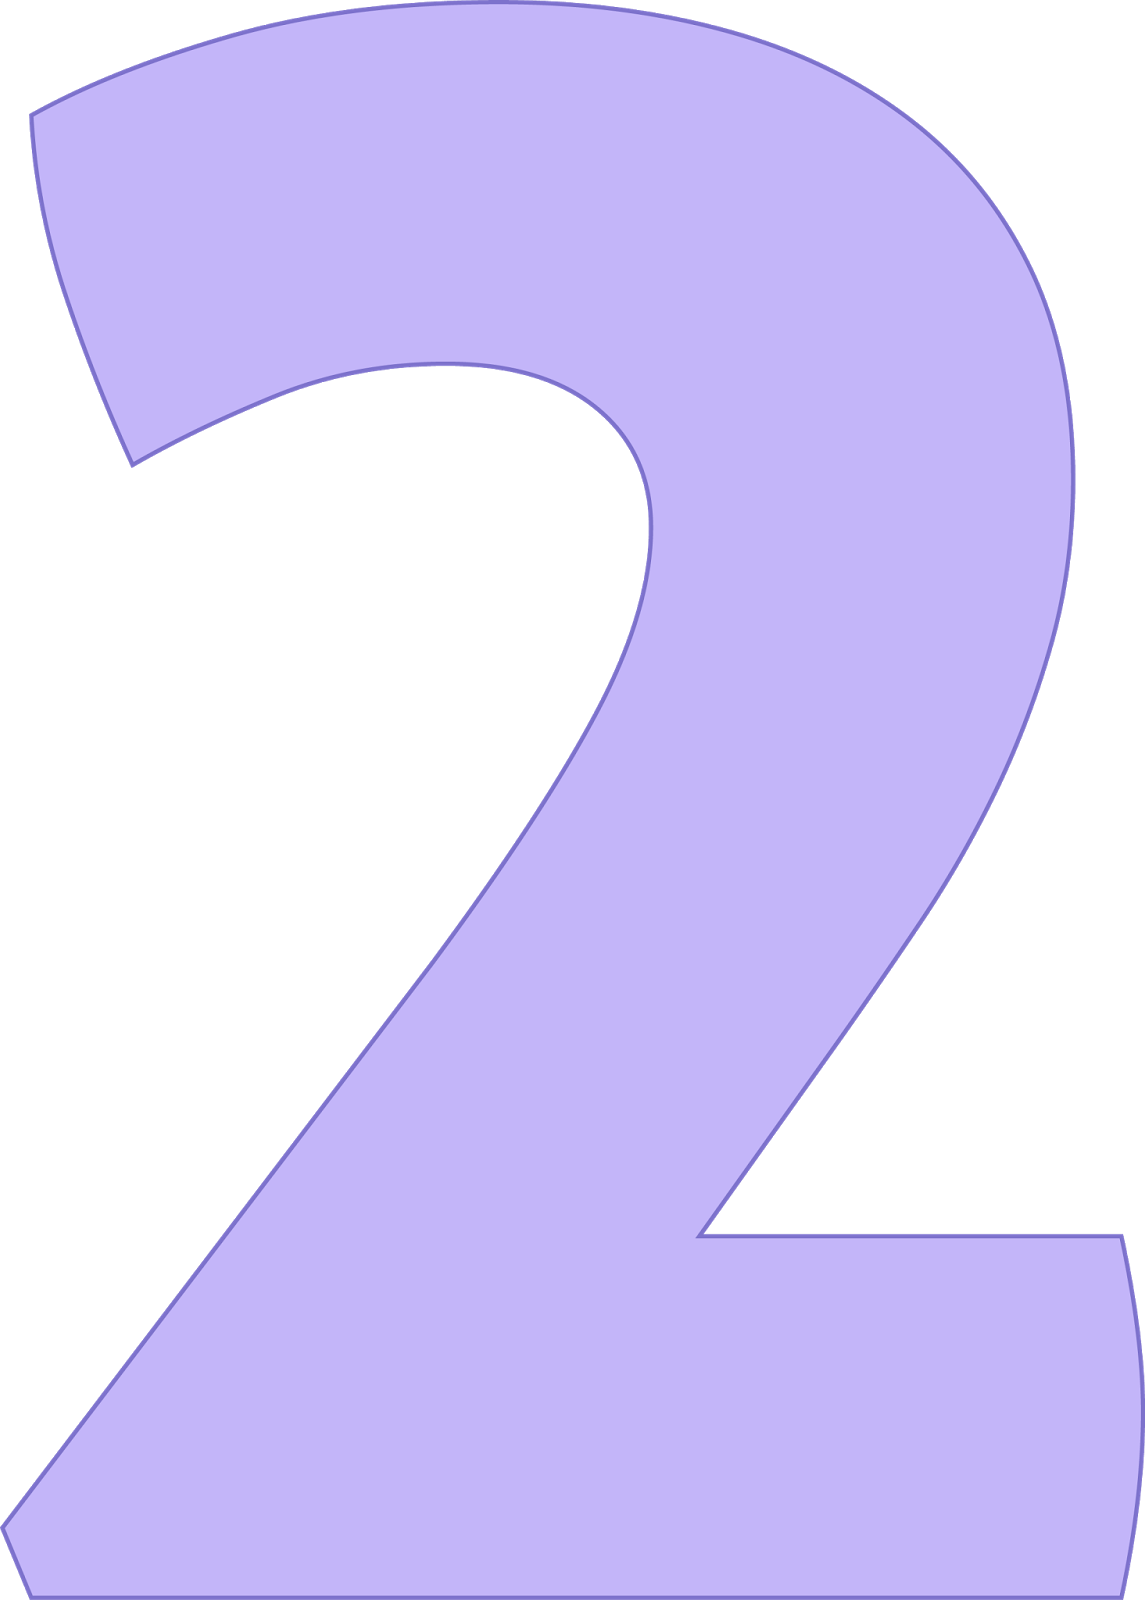 A Purple Number On A Black Background